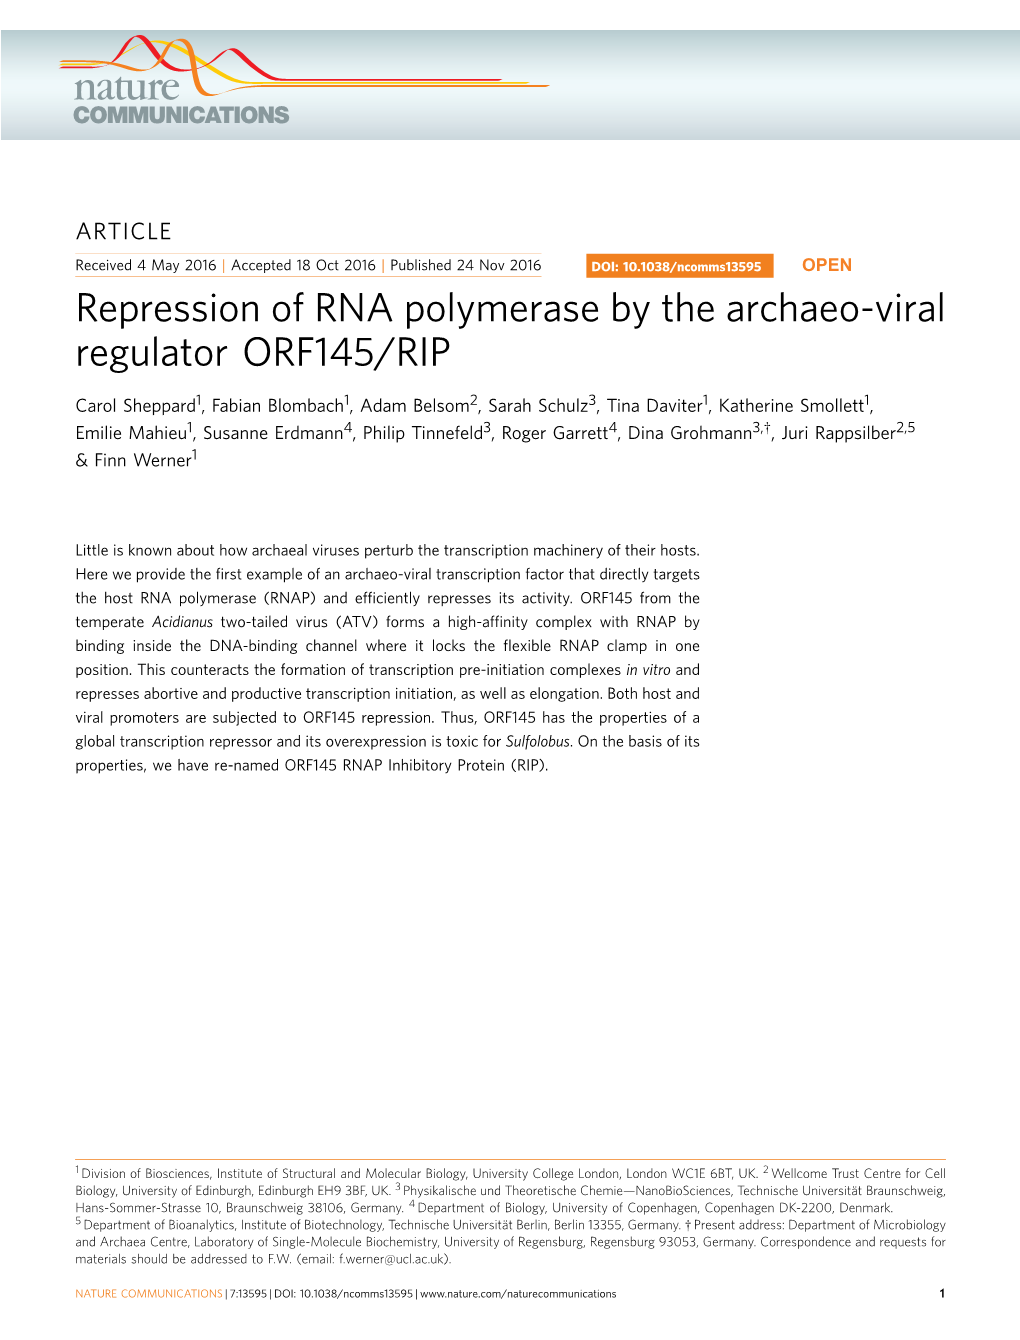 Repression of RNA Polymerase by the Archaeo-Viral Regulator ORF145/RIP